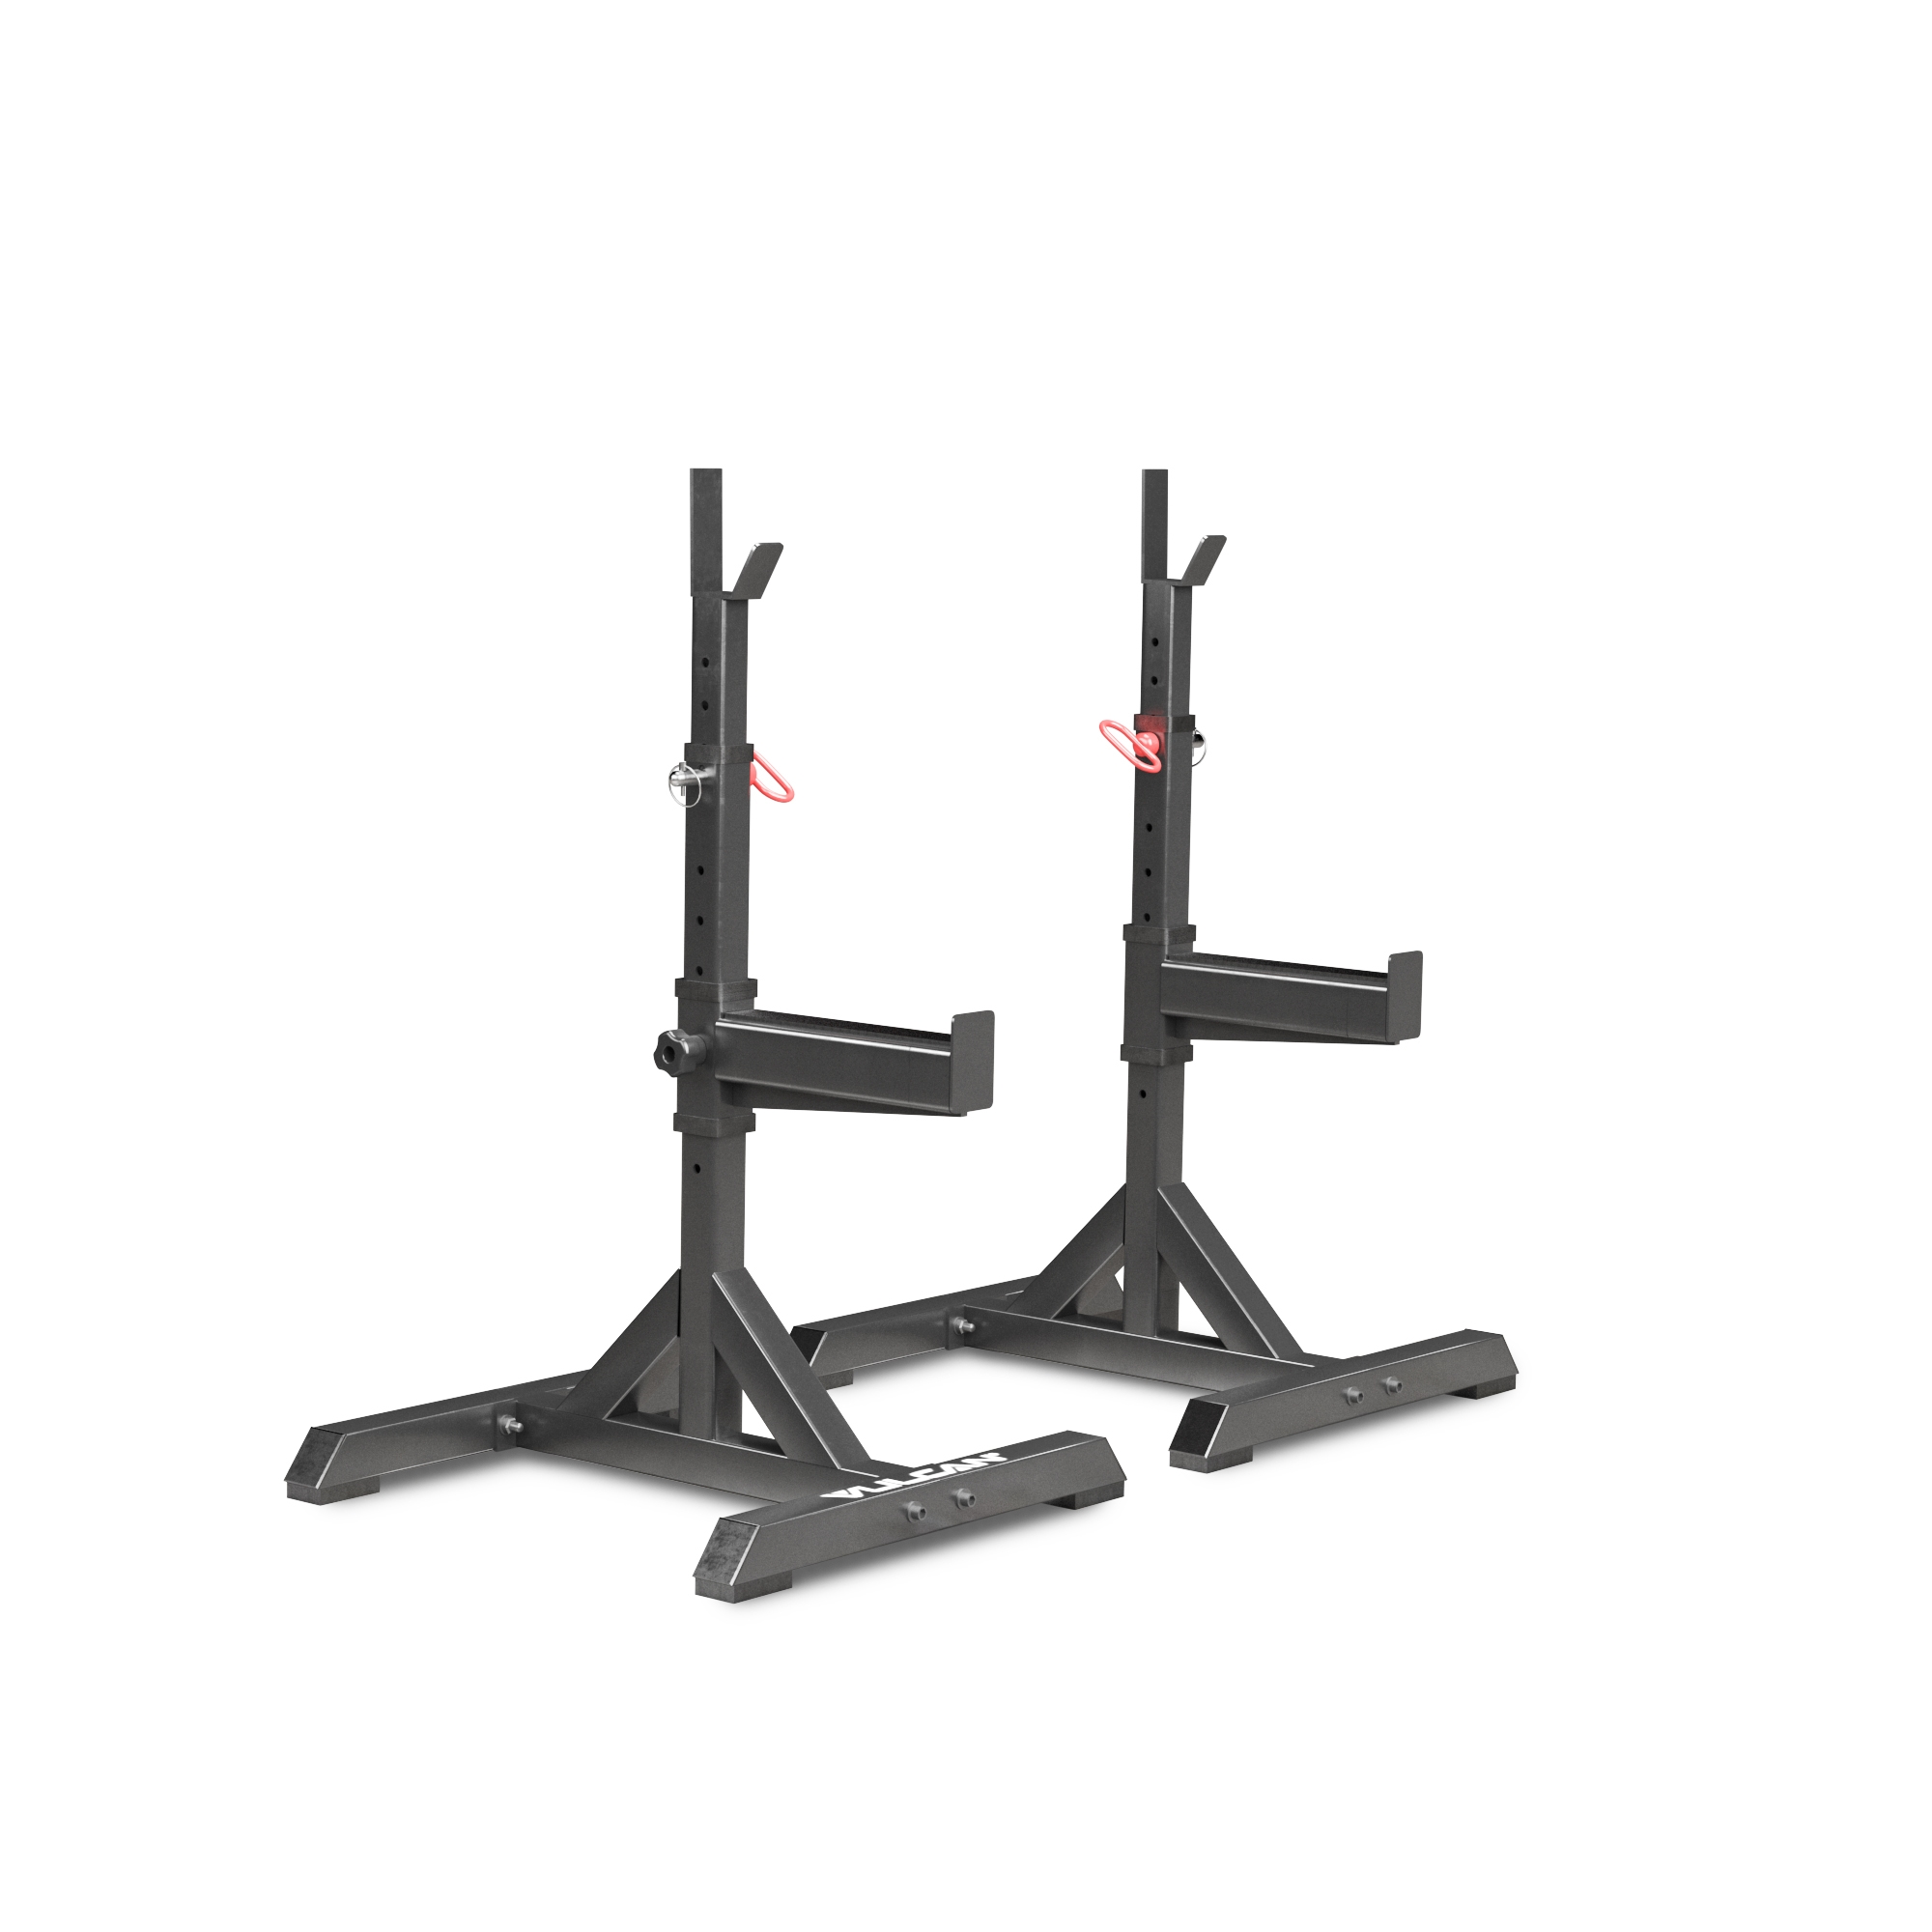 Adjustable Olympic Squat Stands